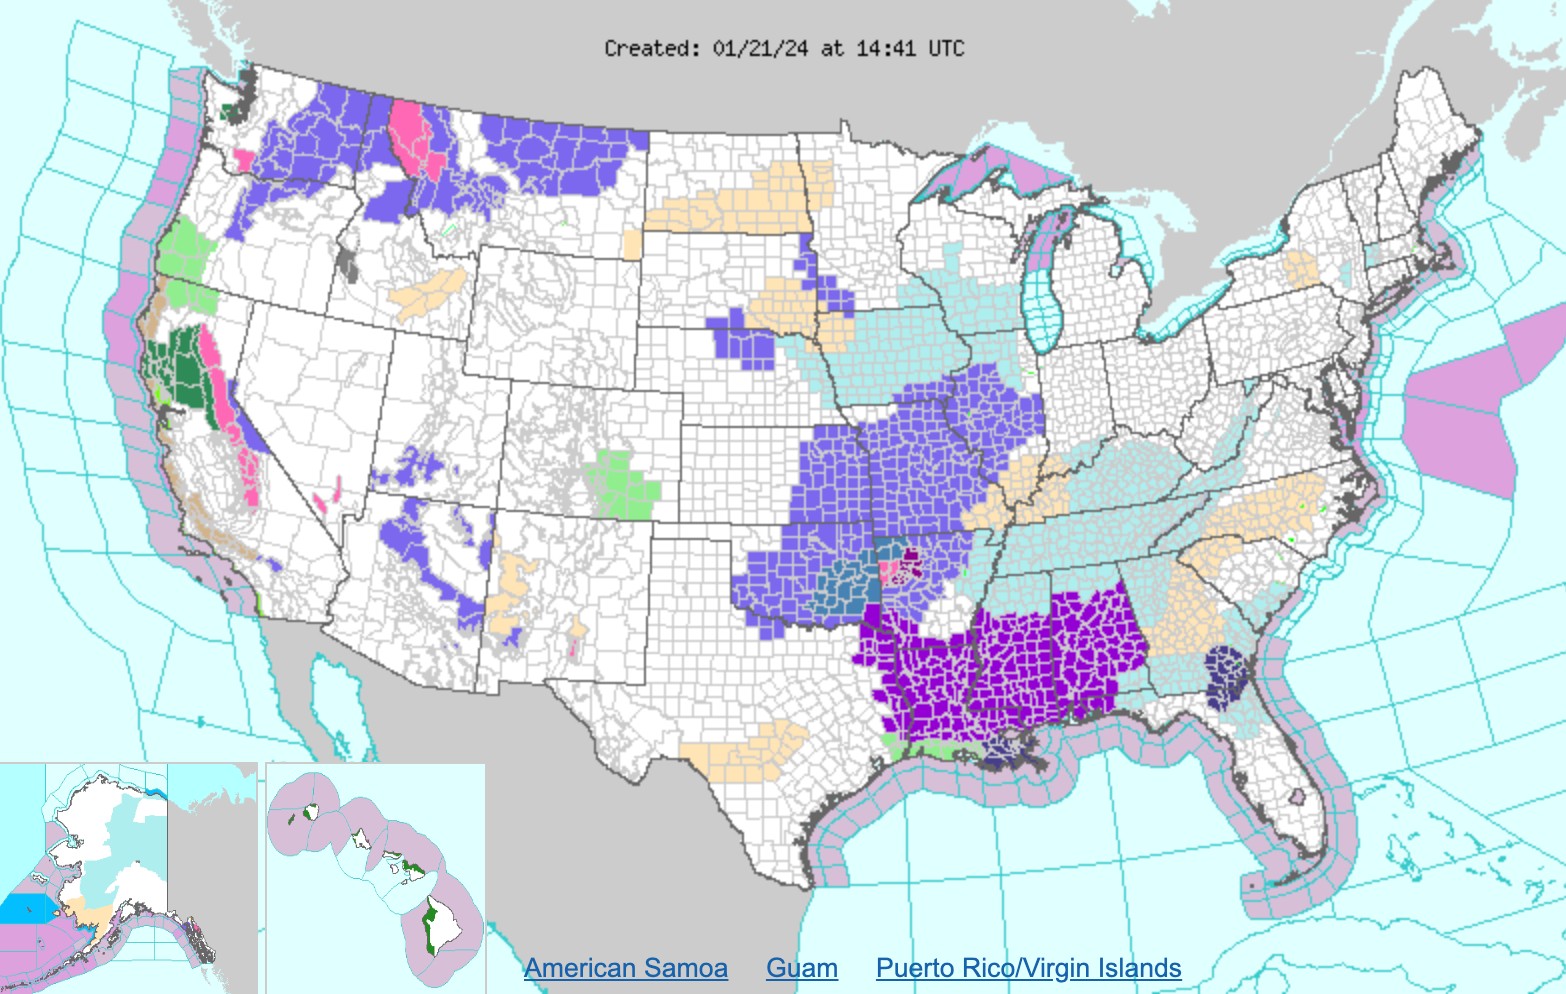 Wind chill and hard freeze warnings are in effect throughout the South